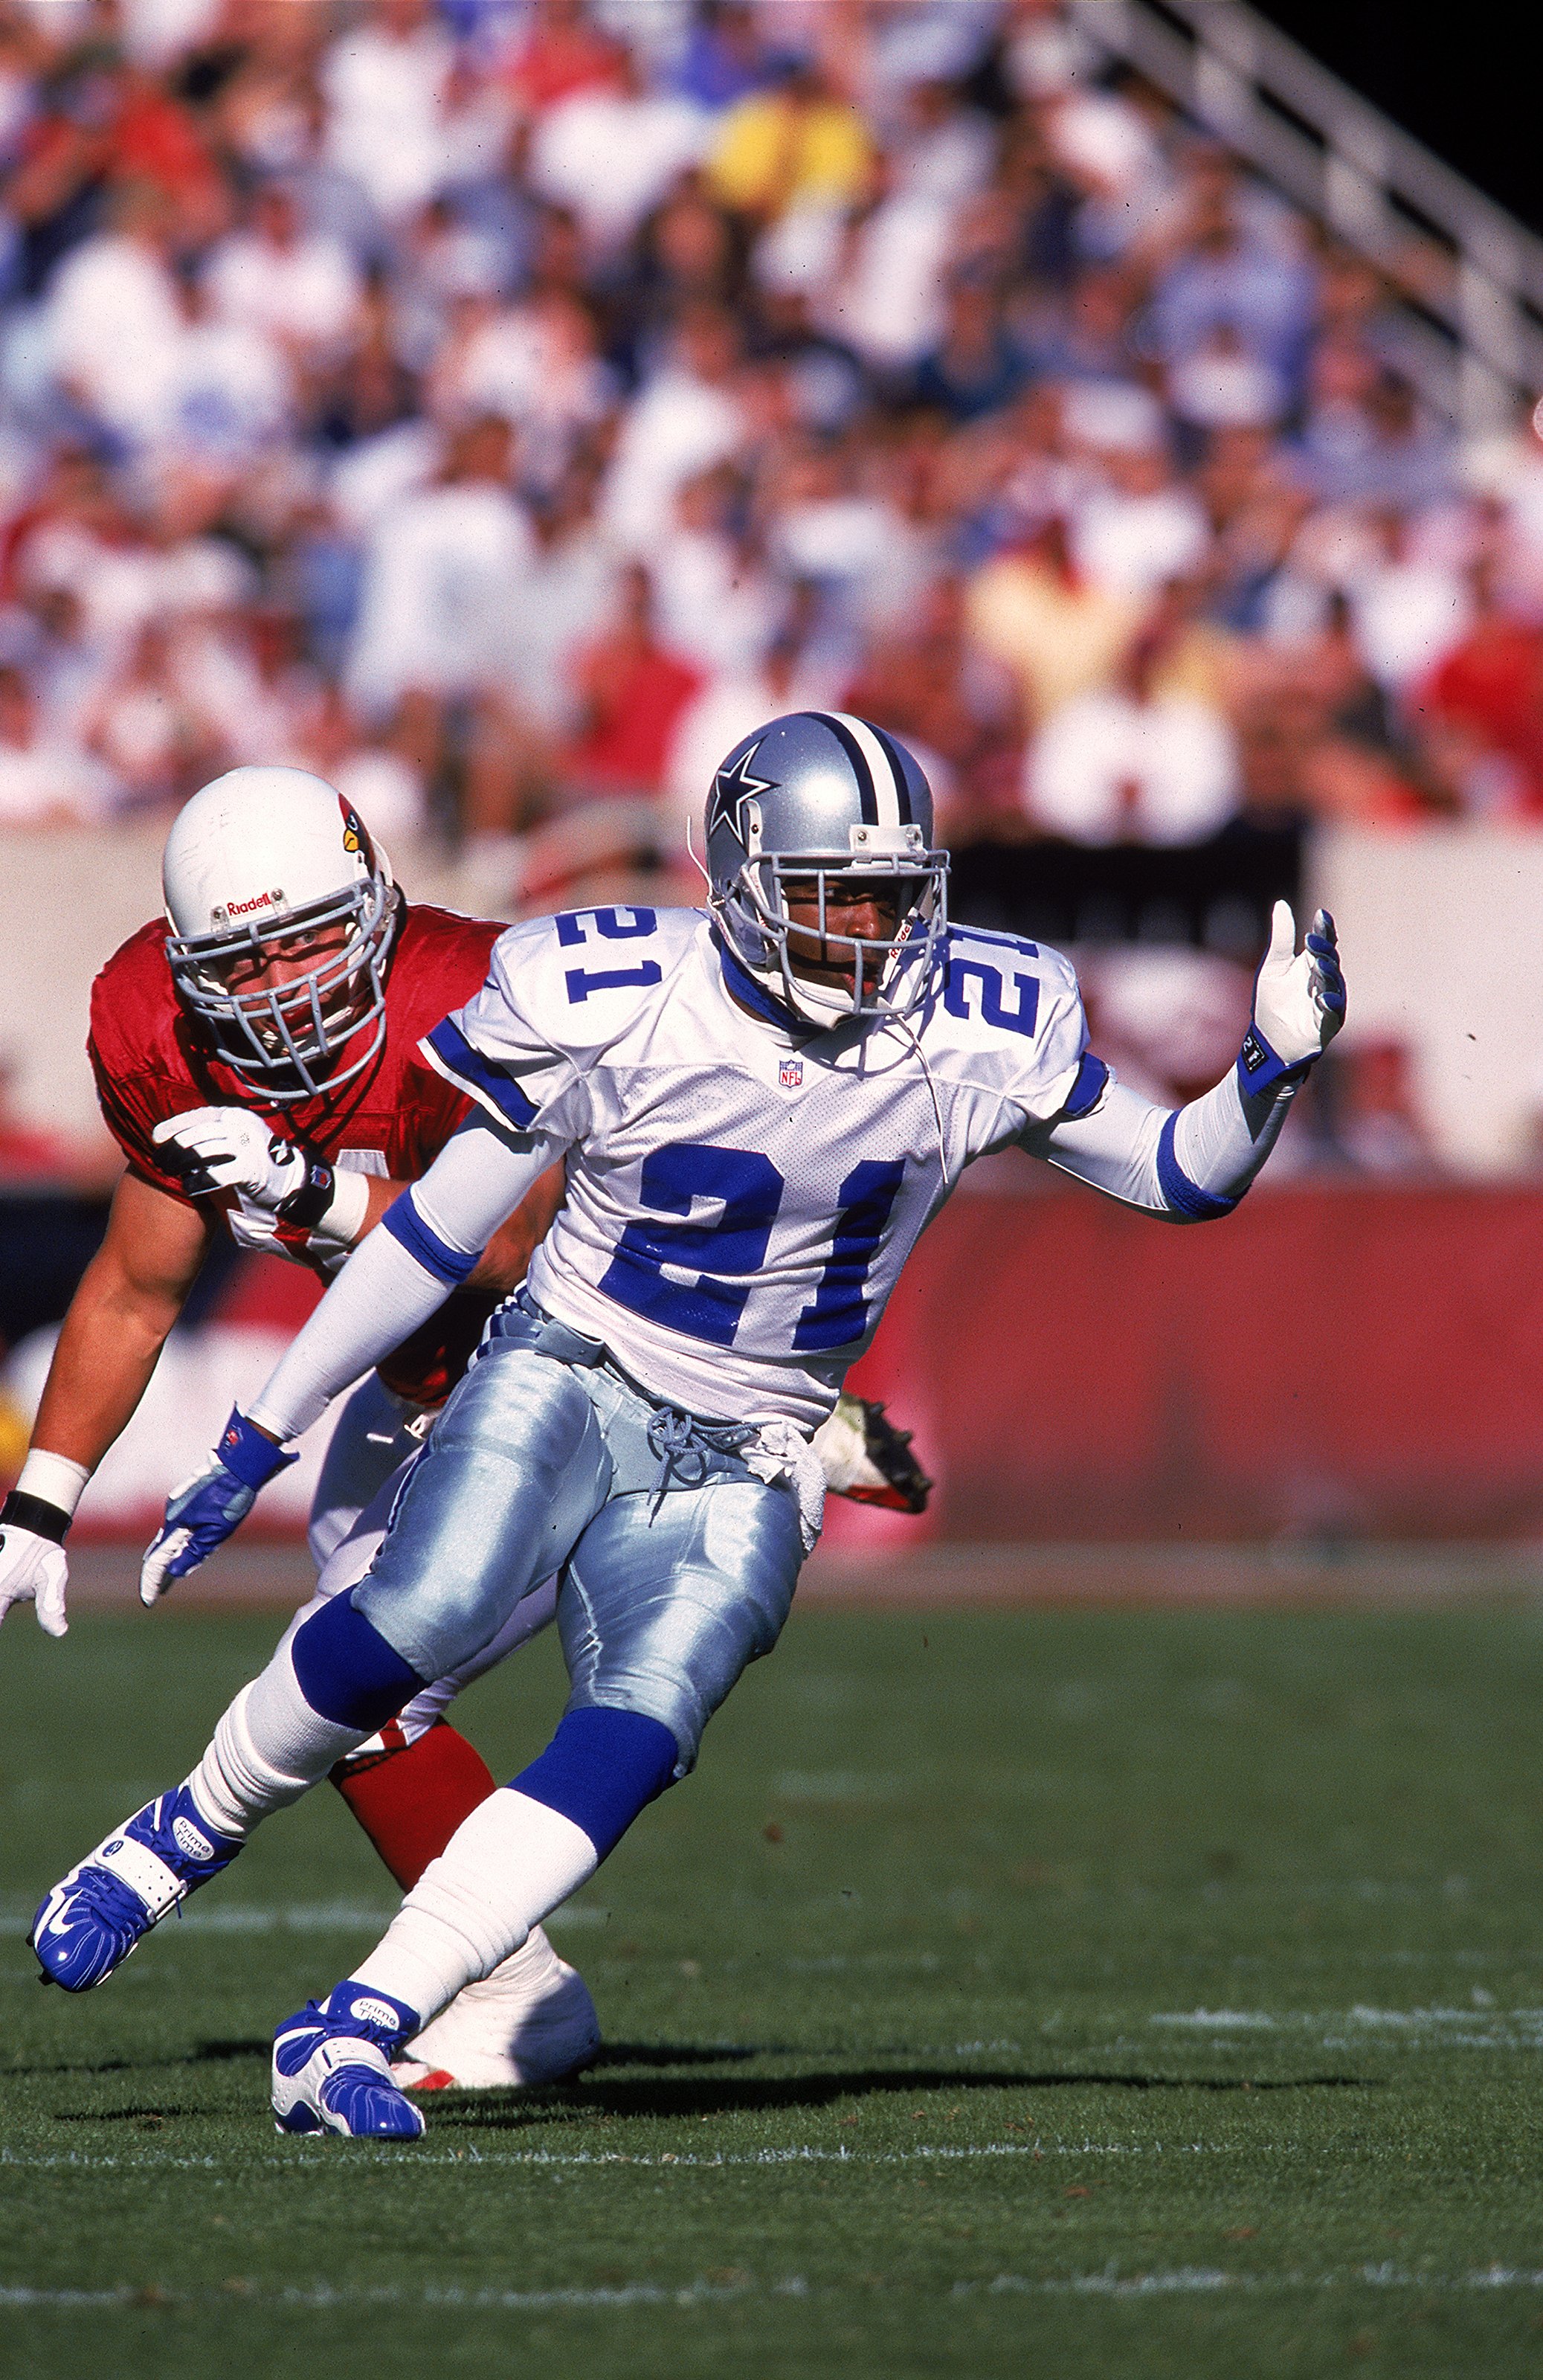 21 Nov 1999: Deion Sanders #21 of the Dallas Cowboys scrambles on the field during the game against the Arizona Cardinals at the Sun Devil Stadium in Tempe, Arizona. The Cardinals defeated the Cowboys 9-13. Mandatory Credit: Otto Greule Jr.  /Allsport